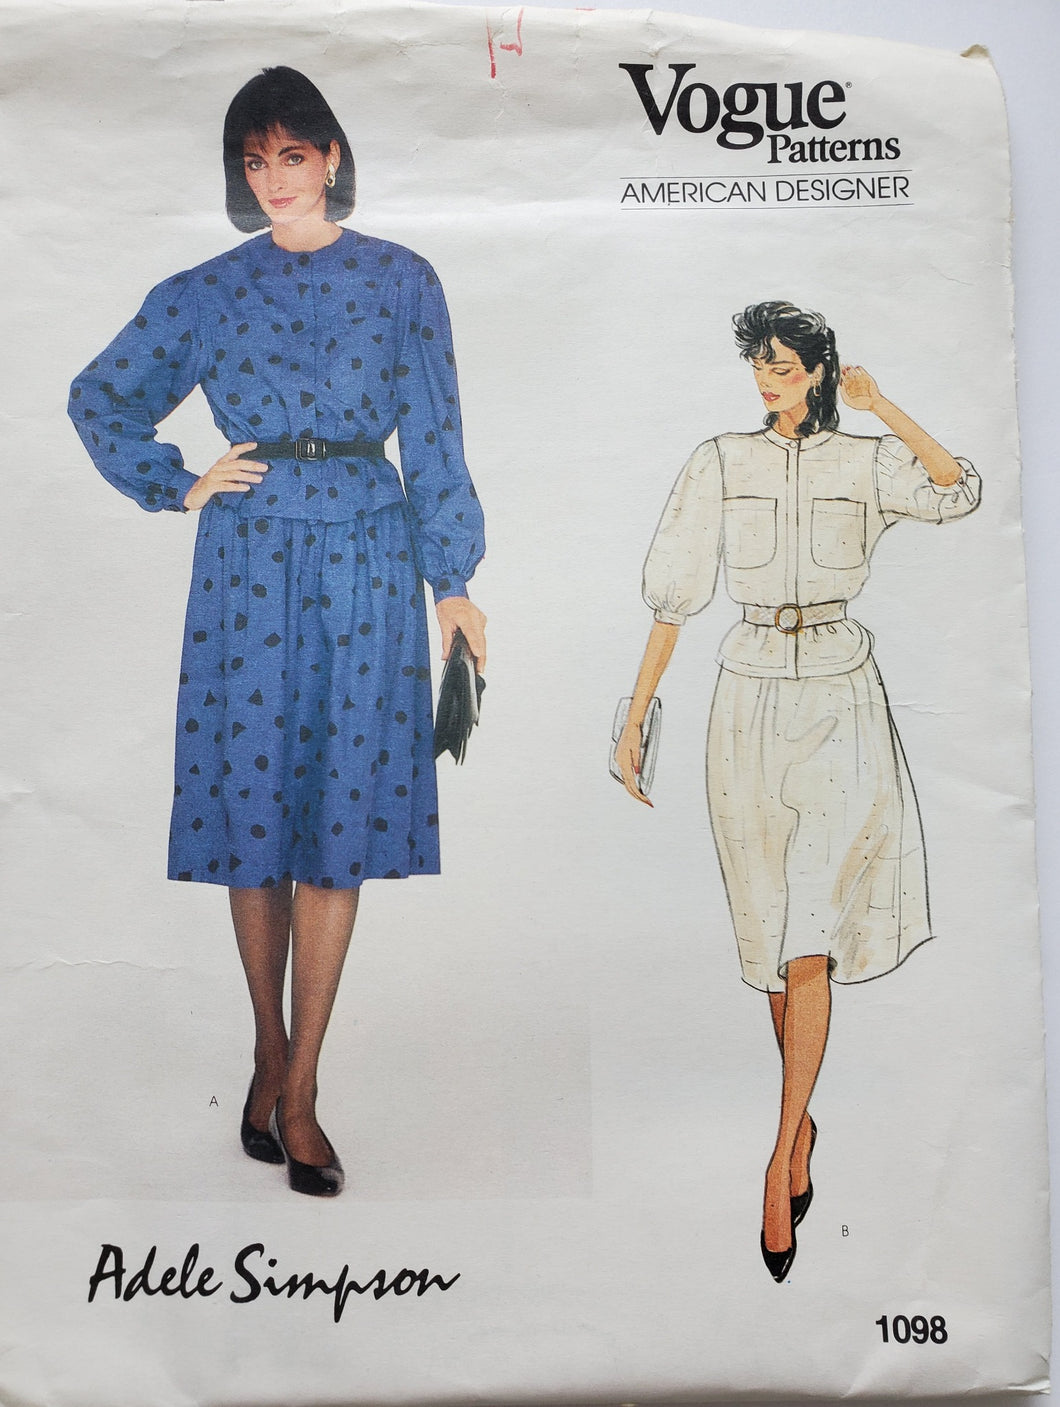 Vogue Pattern 1098, UNCUT, American Designer Adele Simpson, Skirt and Top Size 16, Very Rare 